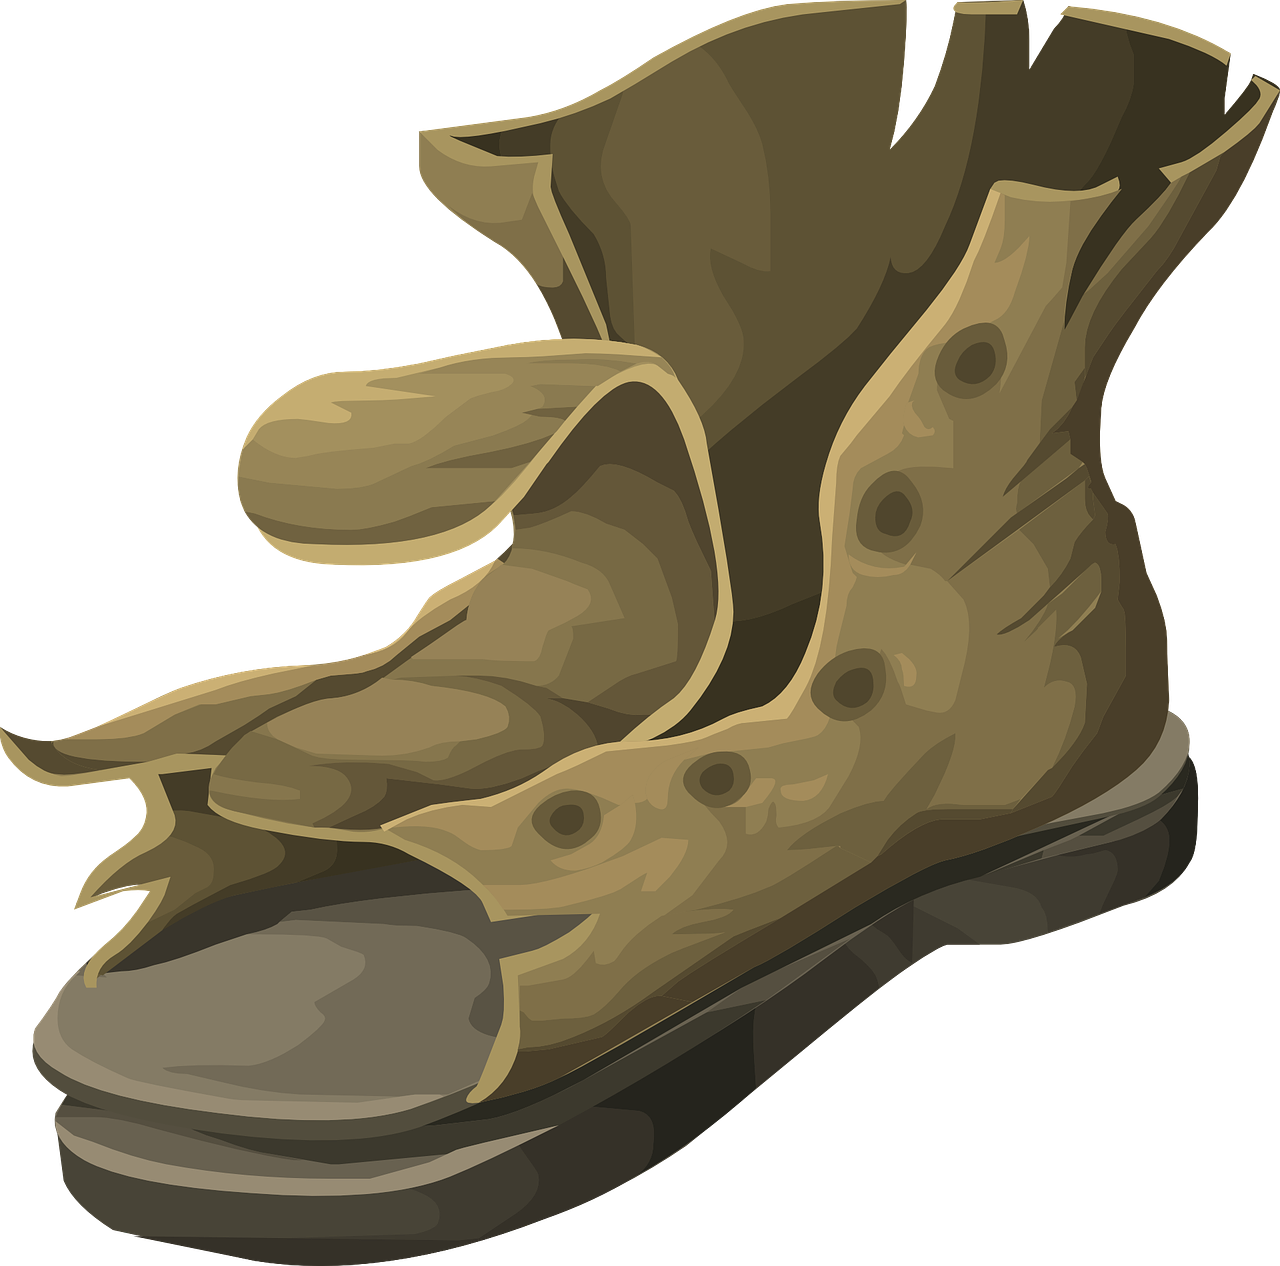 a pair of shoes sitting on top of each other, concept art, brownish fossil, svg illustration, wooden bark armor, high detail illustration